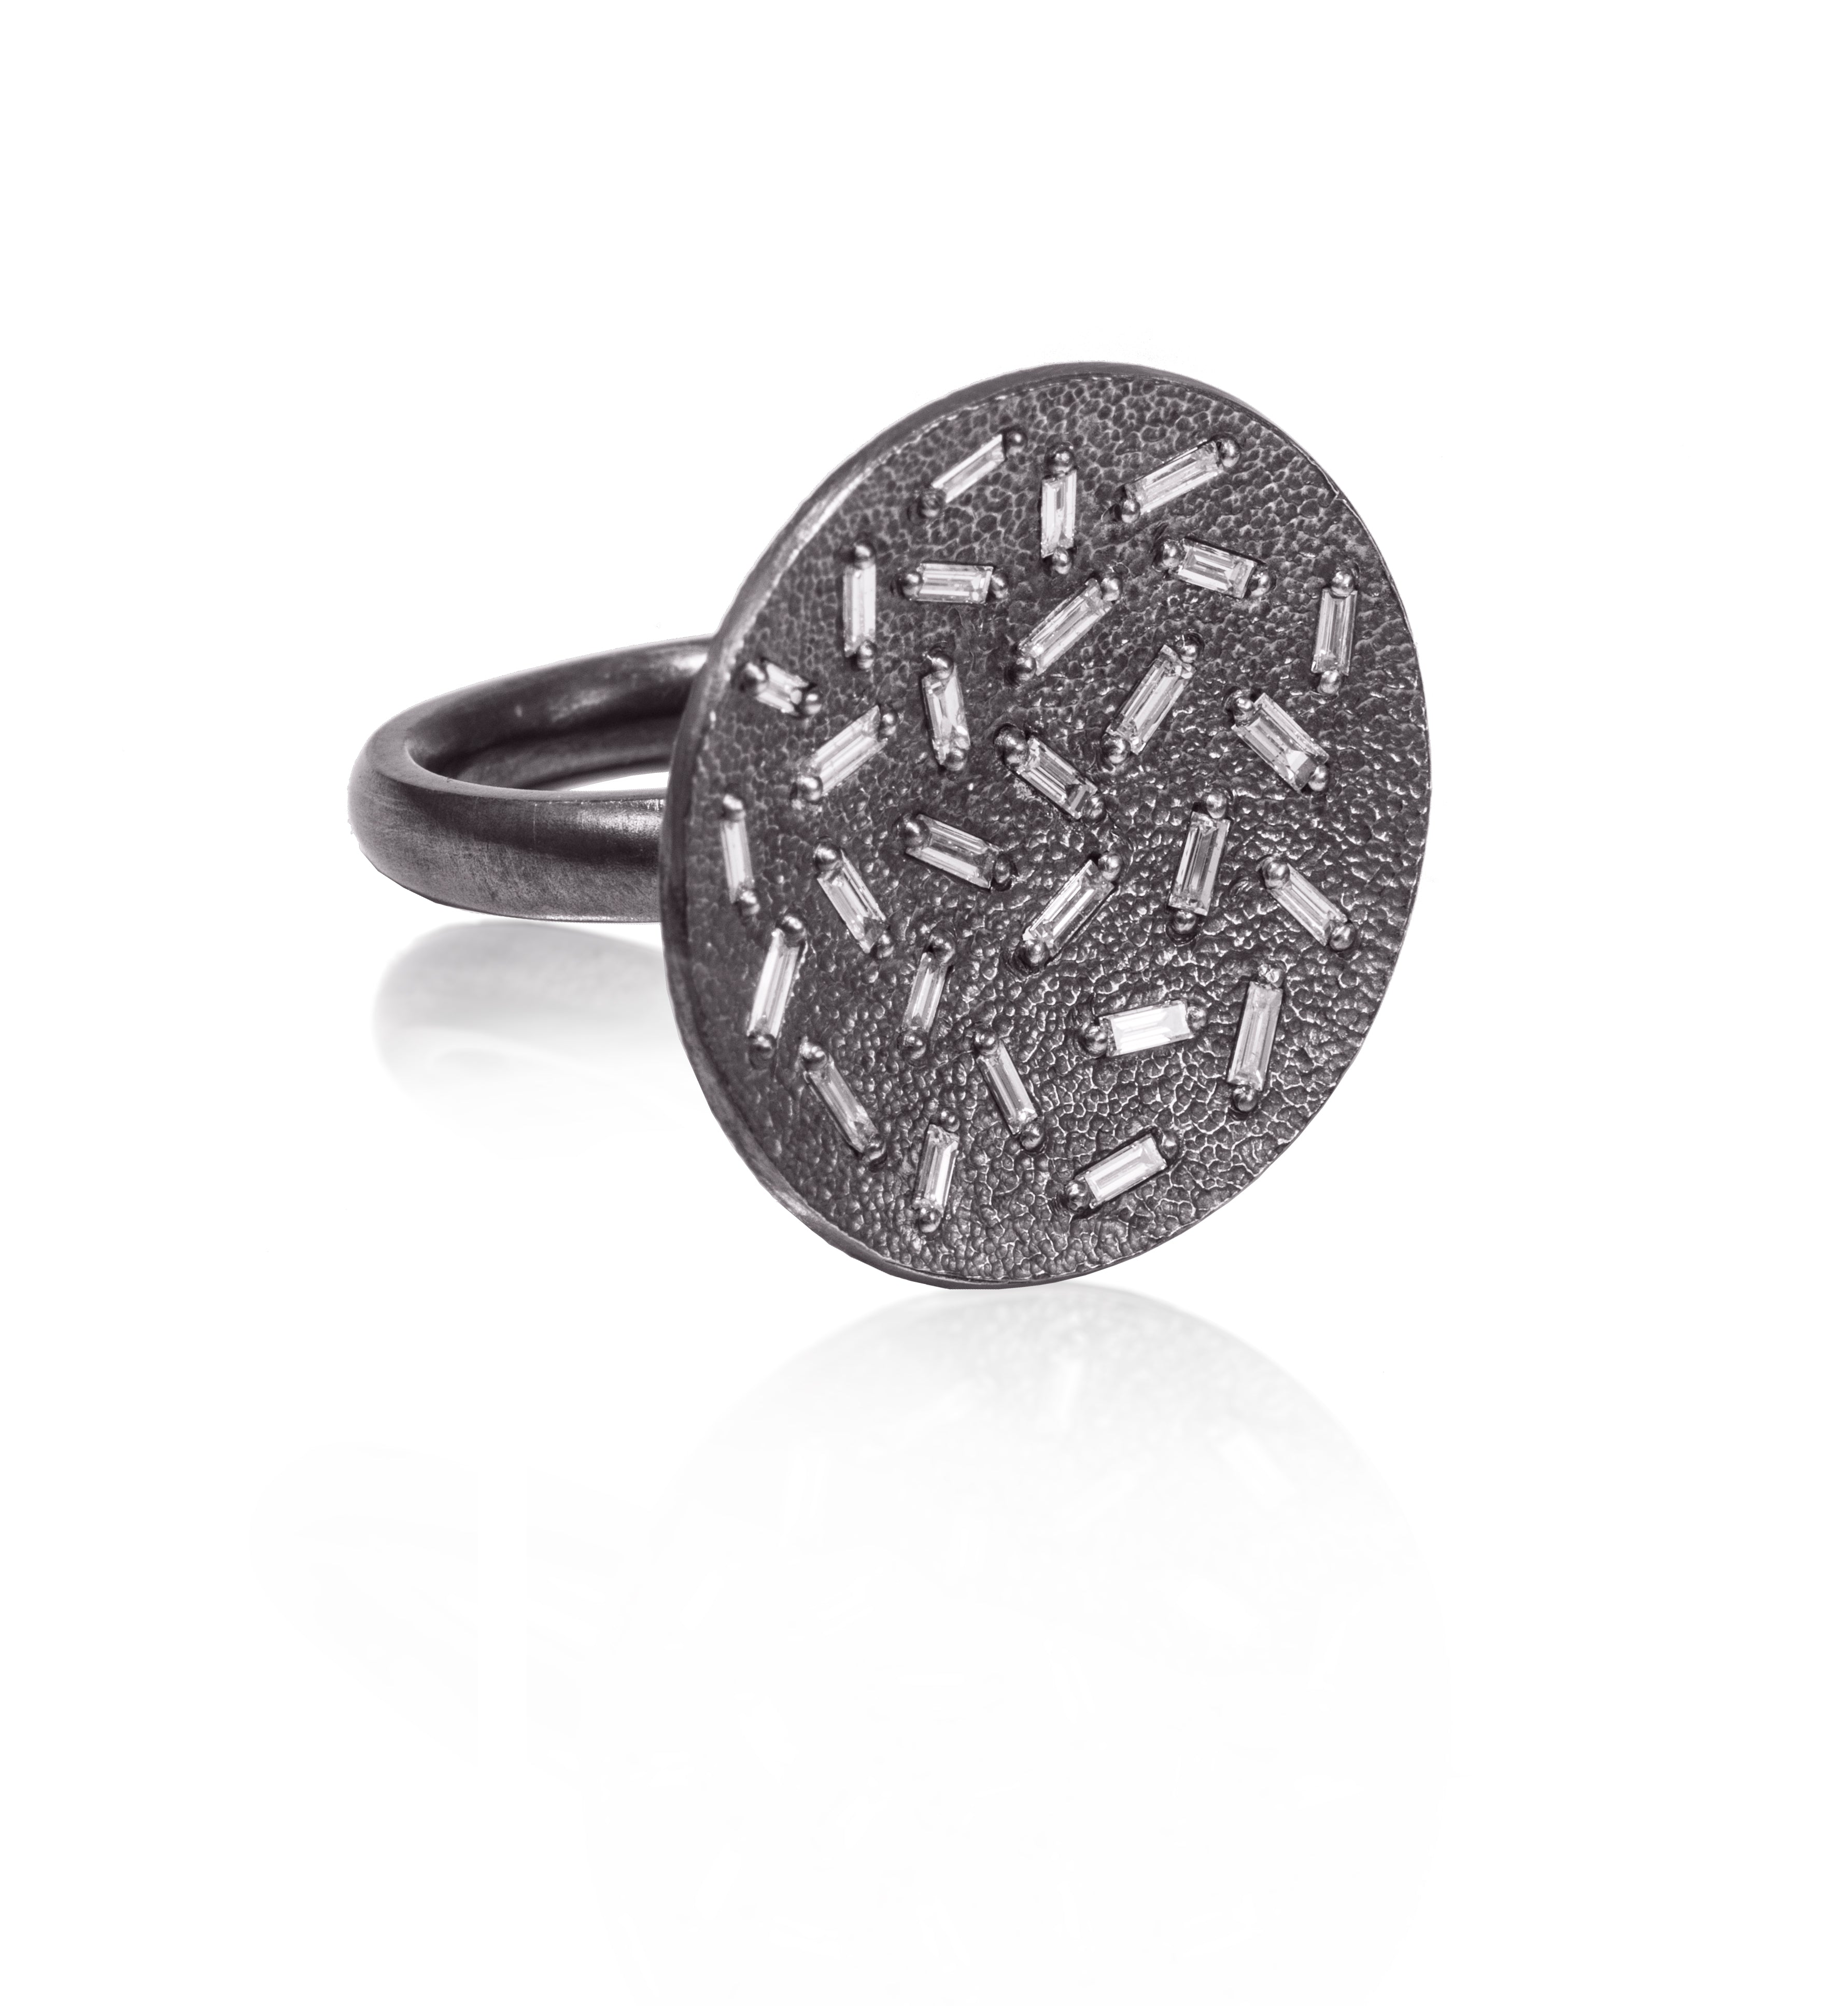 This large circular pendant ring in oxidized silver is set with 28 white diamond baguettes.  The random angles of the baguettes catch the light in exciting ways when worn. 0.796 tcw.